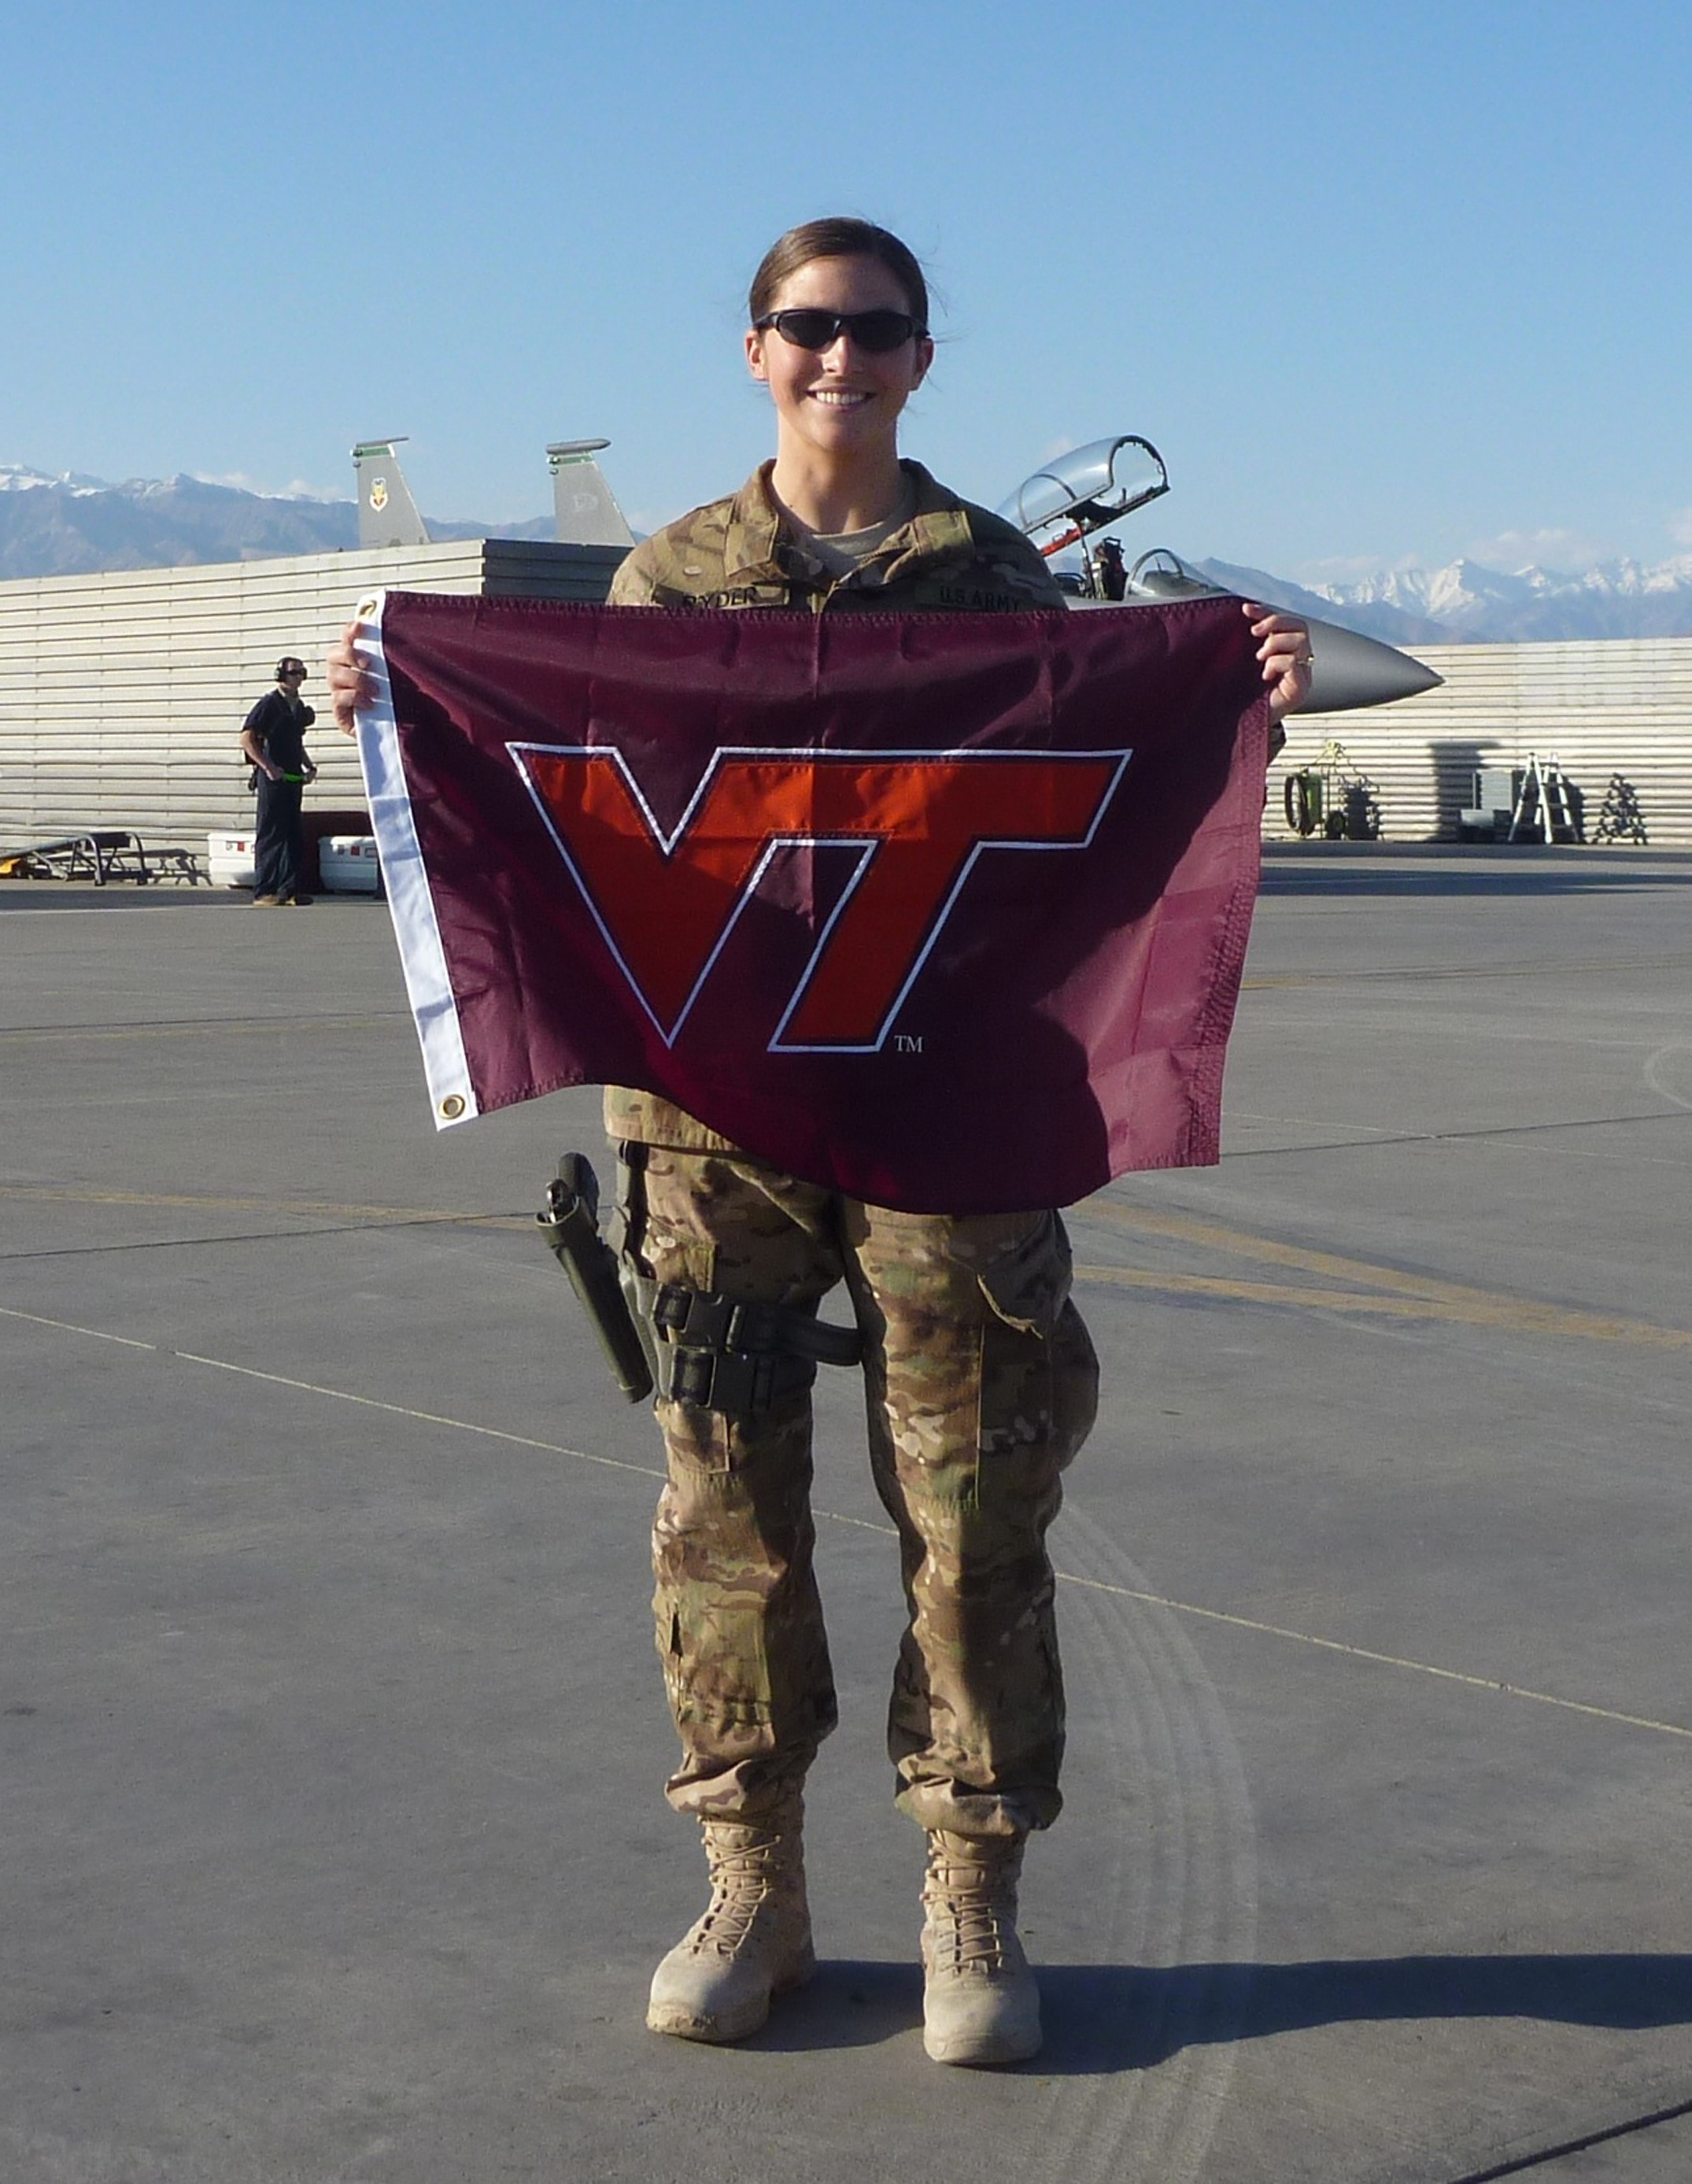 1st Lt. Patricia Urick Ryder, U.S. Army, Virginia Tech Corps of Cadets Class of 2010 shown in Afghanistan